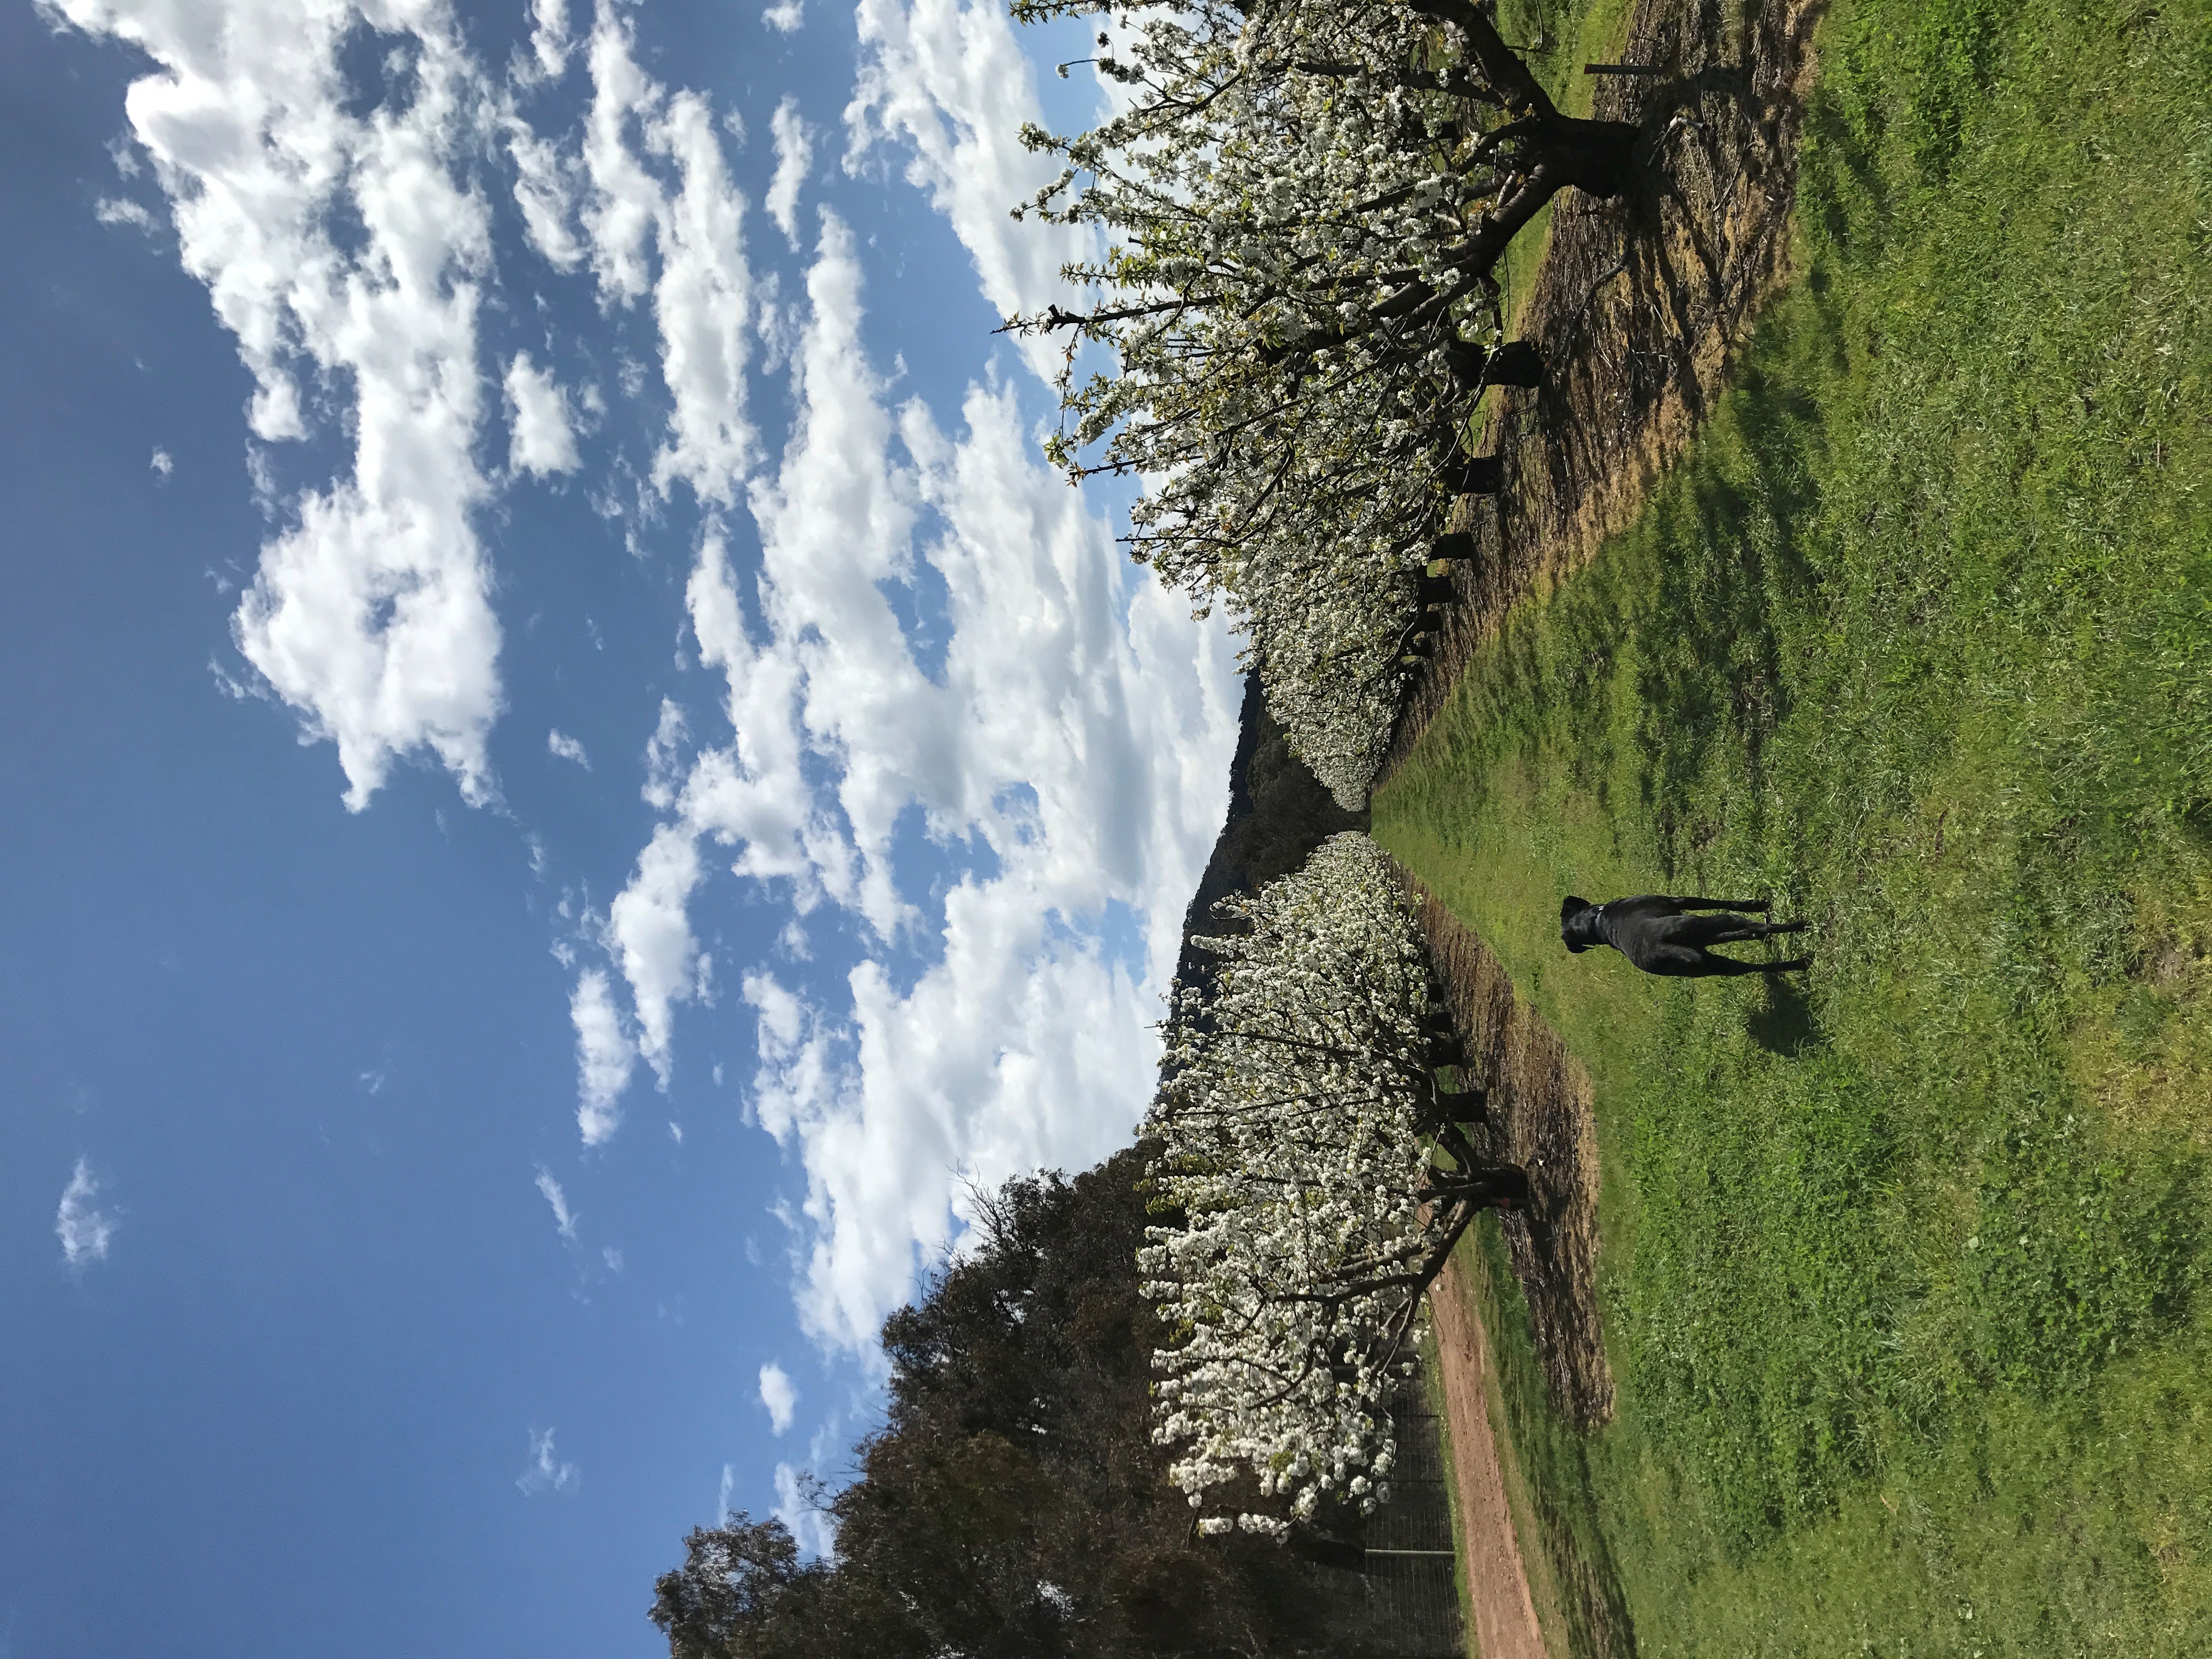 Flowering orchard with dog